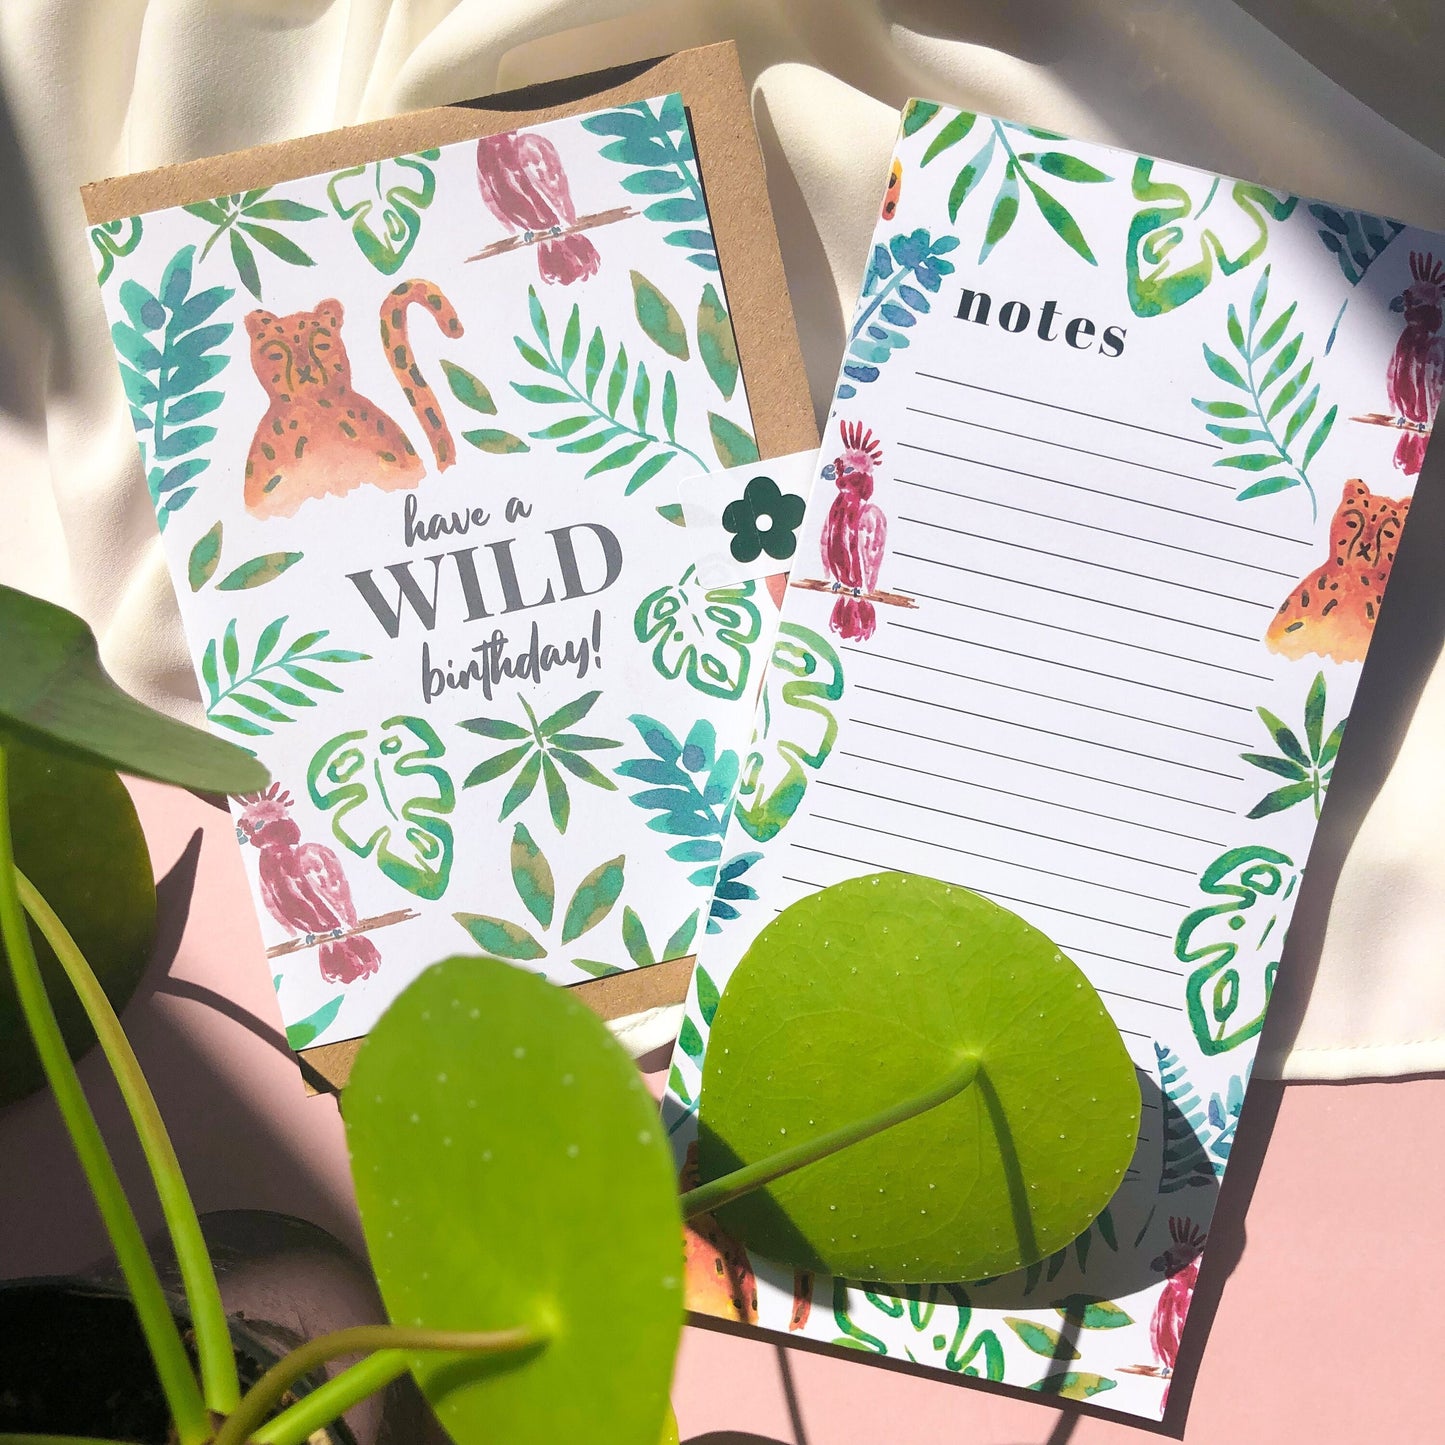 ATropical Stationery Birthday Gift Set: Have a WILD Birthday, Jungle Illustration Notepad To Do List Memo Pad, 50 Pages - Animal Lover Gift